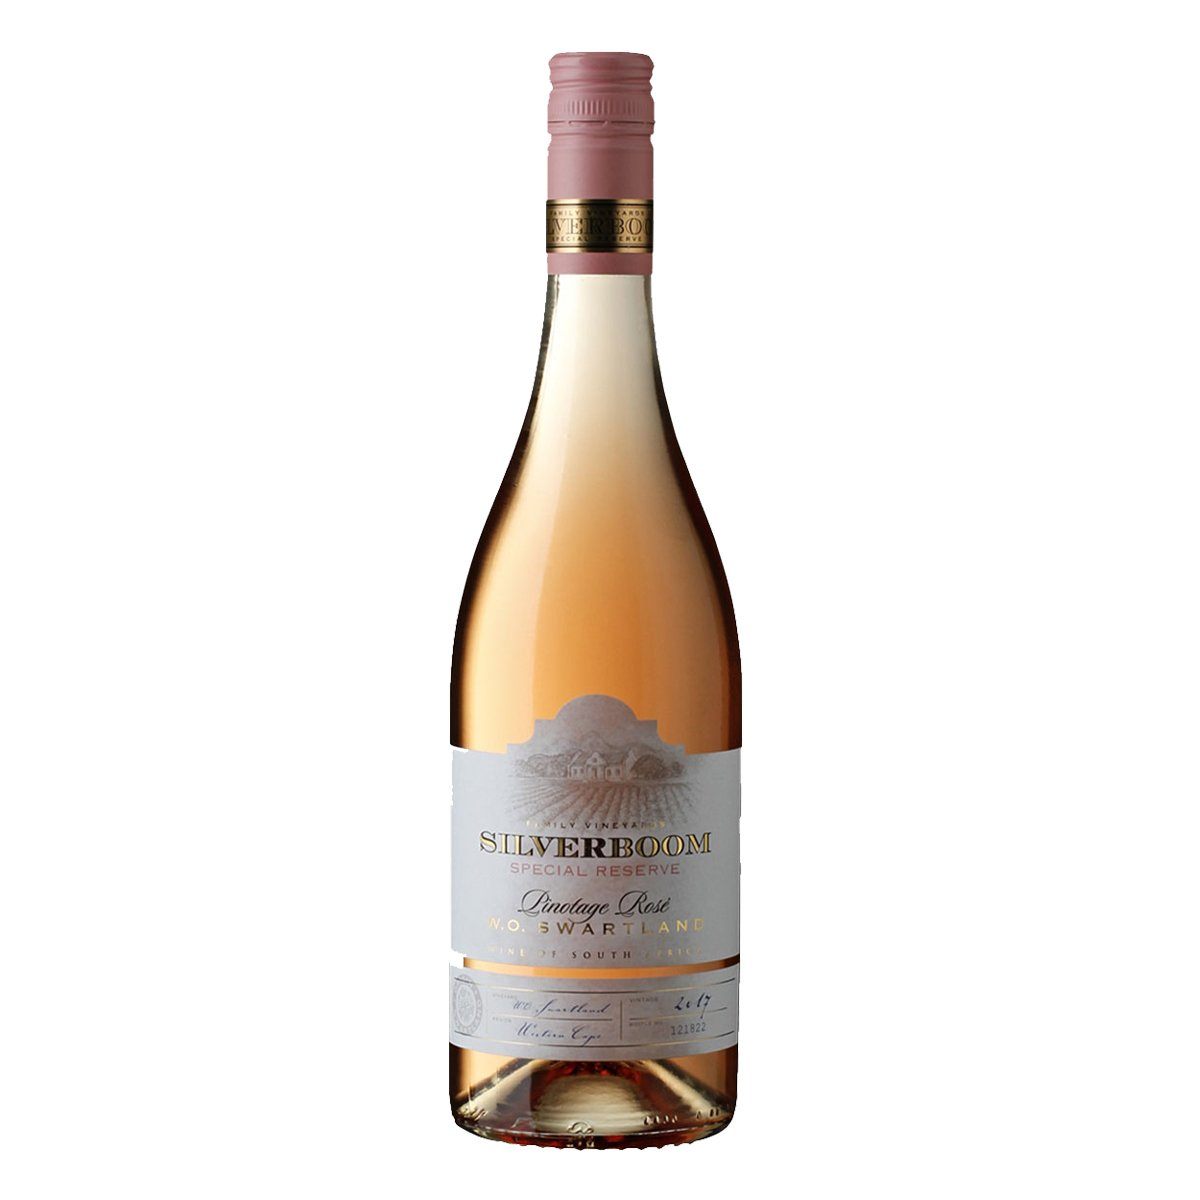 Silverboom Special Reserve Pinotage Rose Swartland 2020 - Bloom Concept